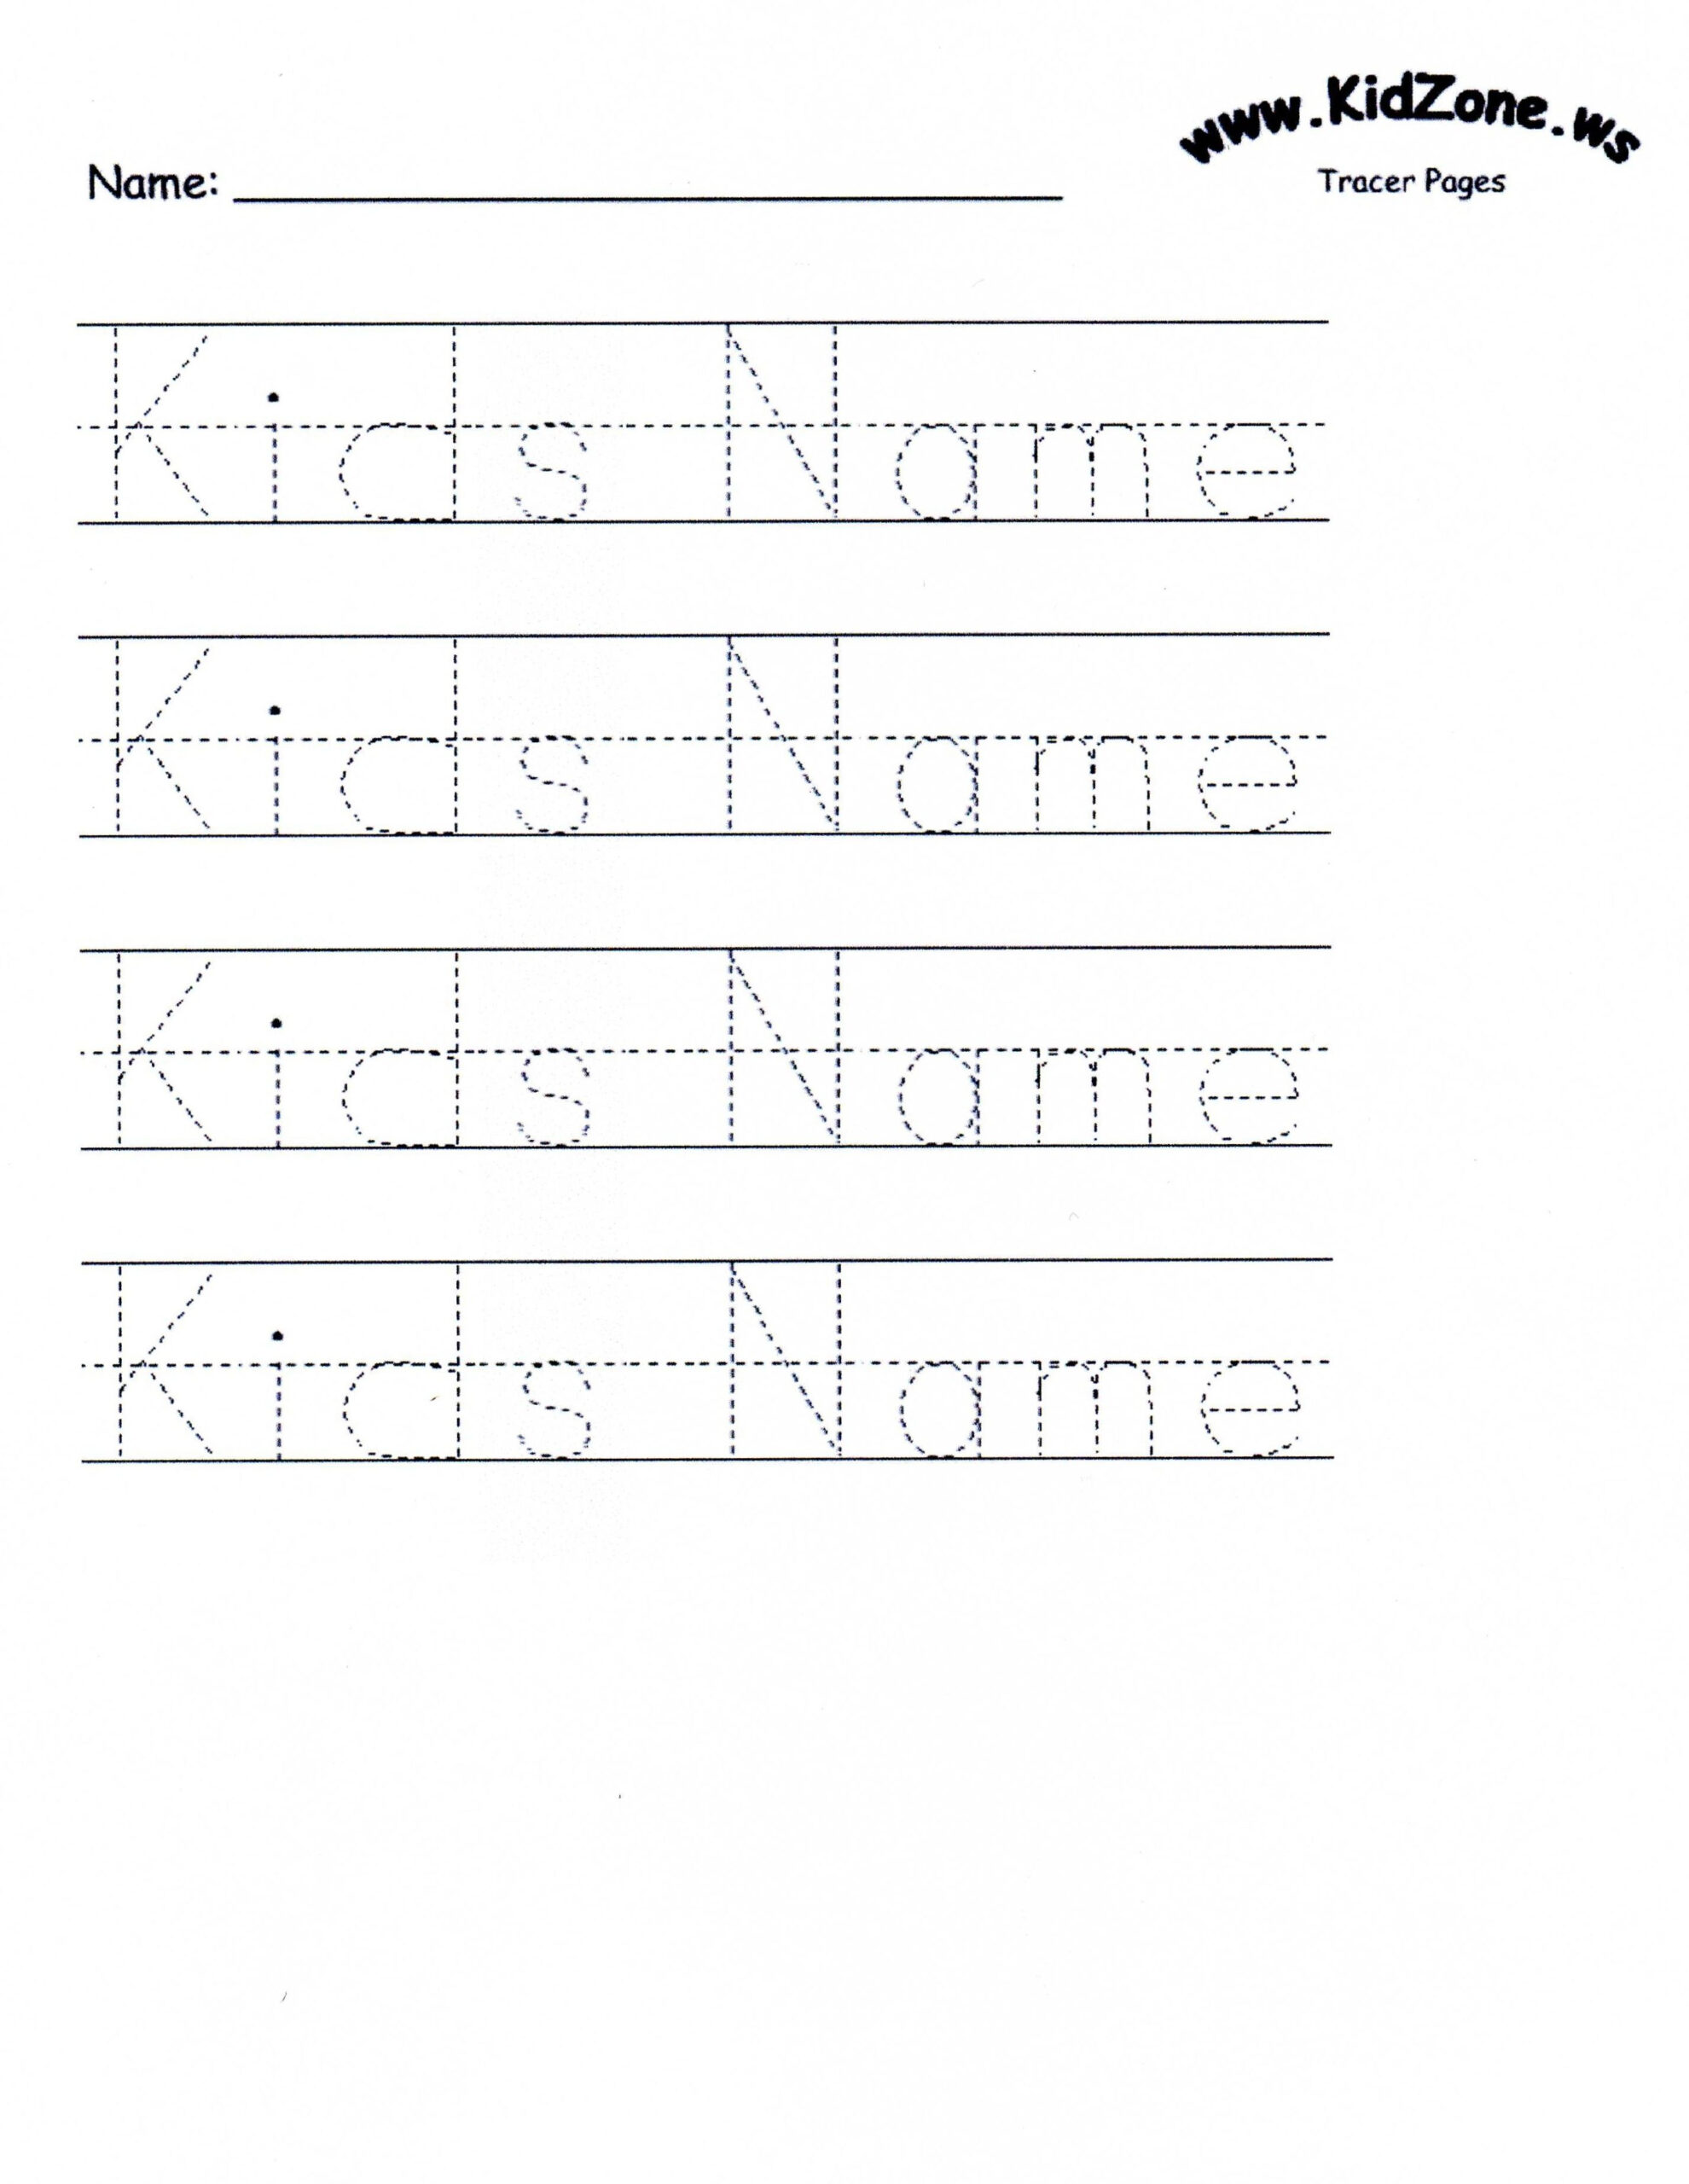 Custom Tracer Pages | Tracing Worksheets Preschool, Name in Name Tracing Sheet Maker